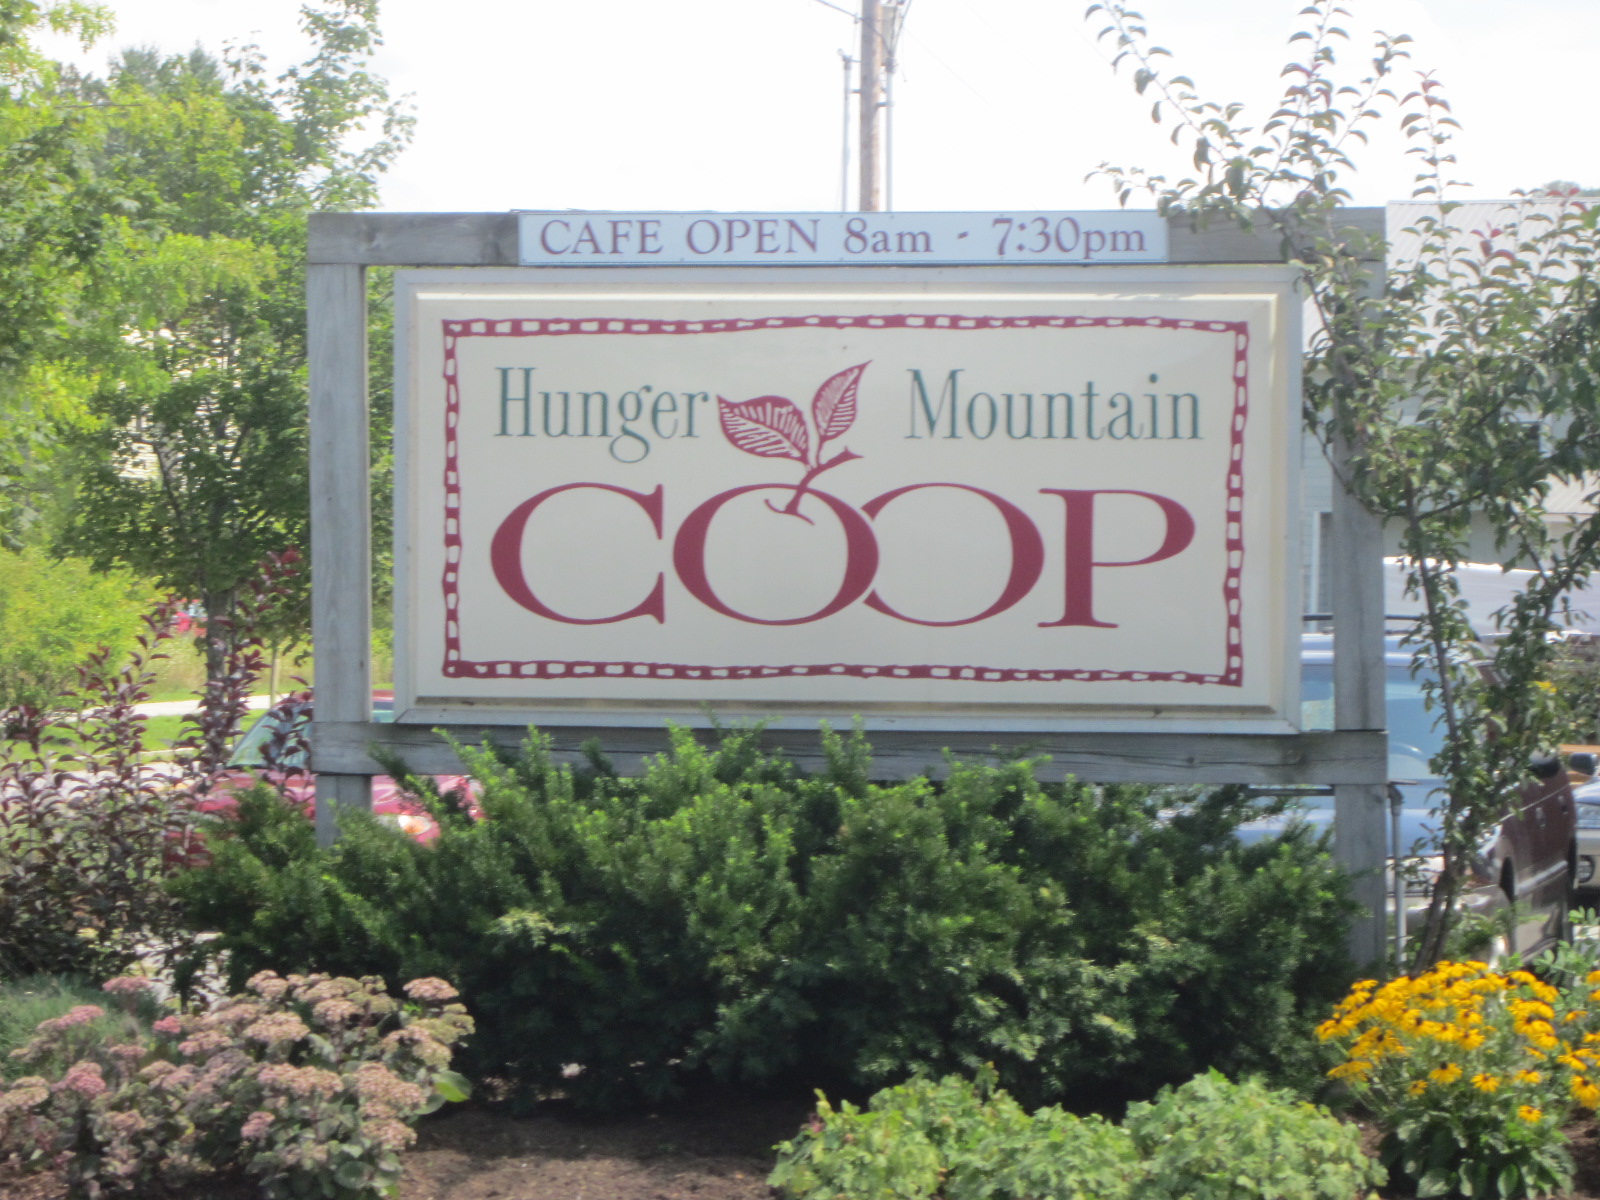 the Hunger Mountain Coop